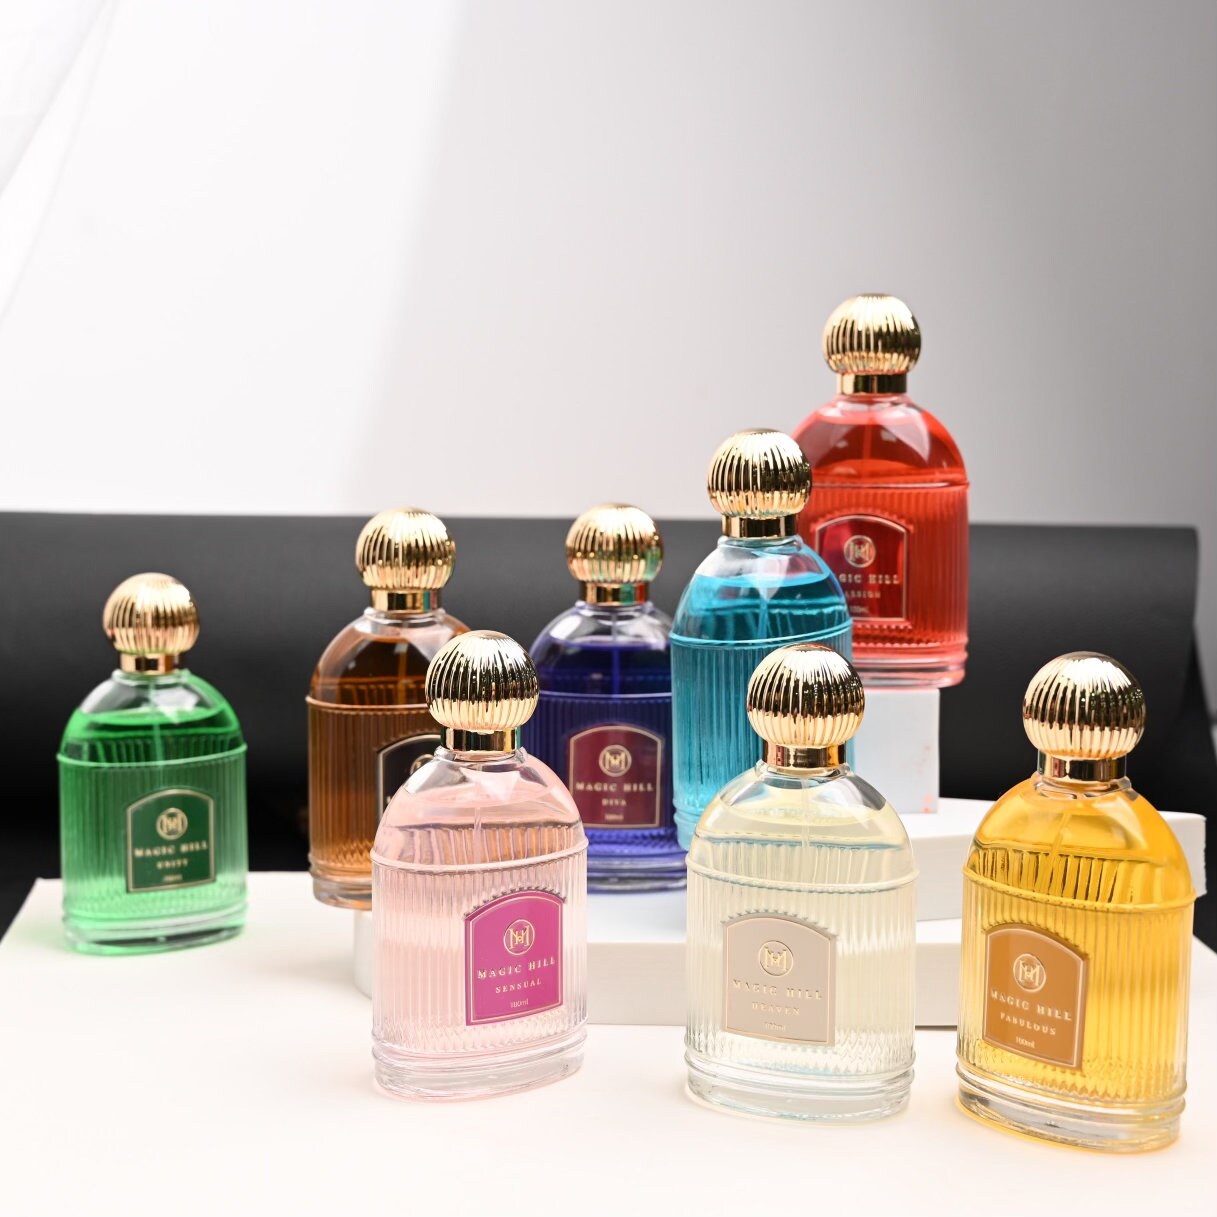 Fabulous Fragrance MAGIC HILL Exclusive Perfume Collection